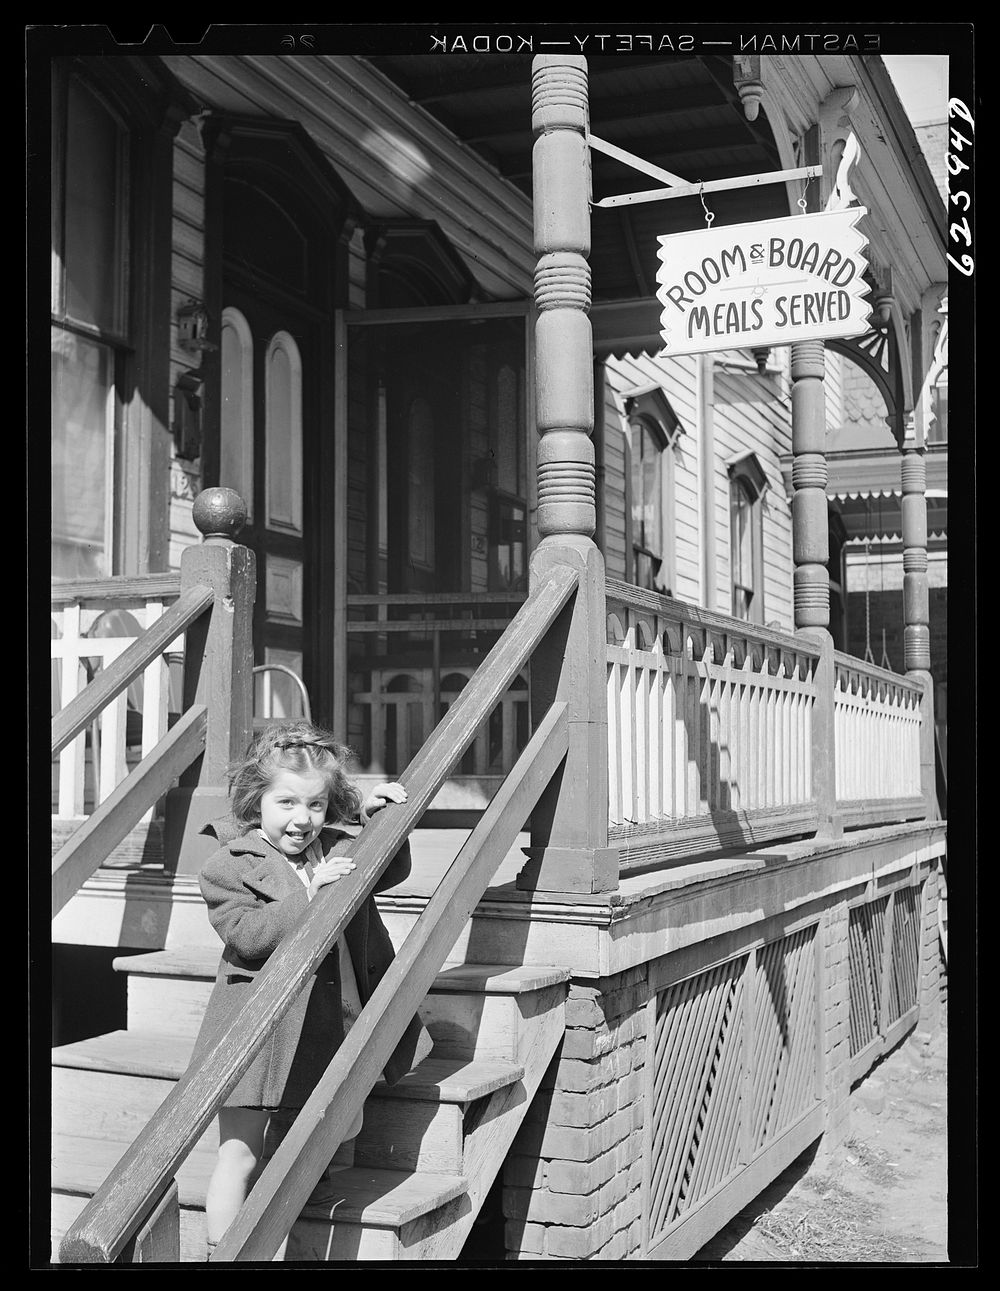 Rooming house. Newport News, Virginia. Sourced from the Library of Congress.